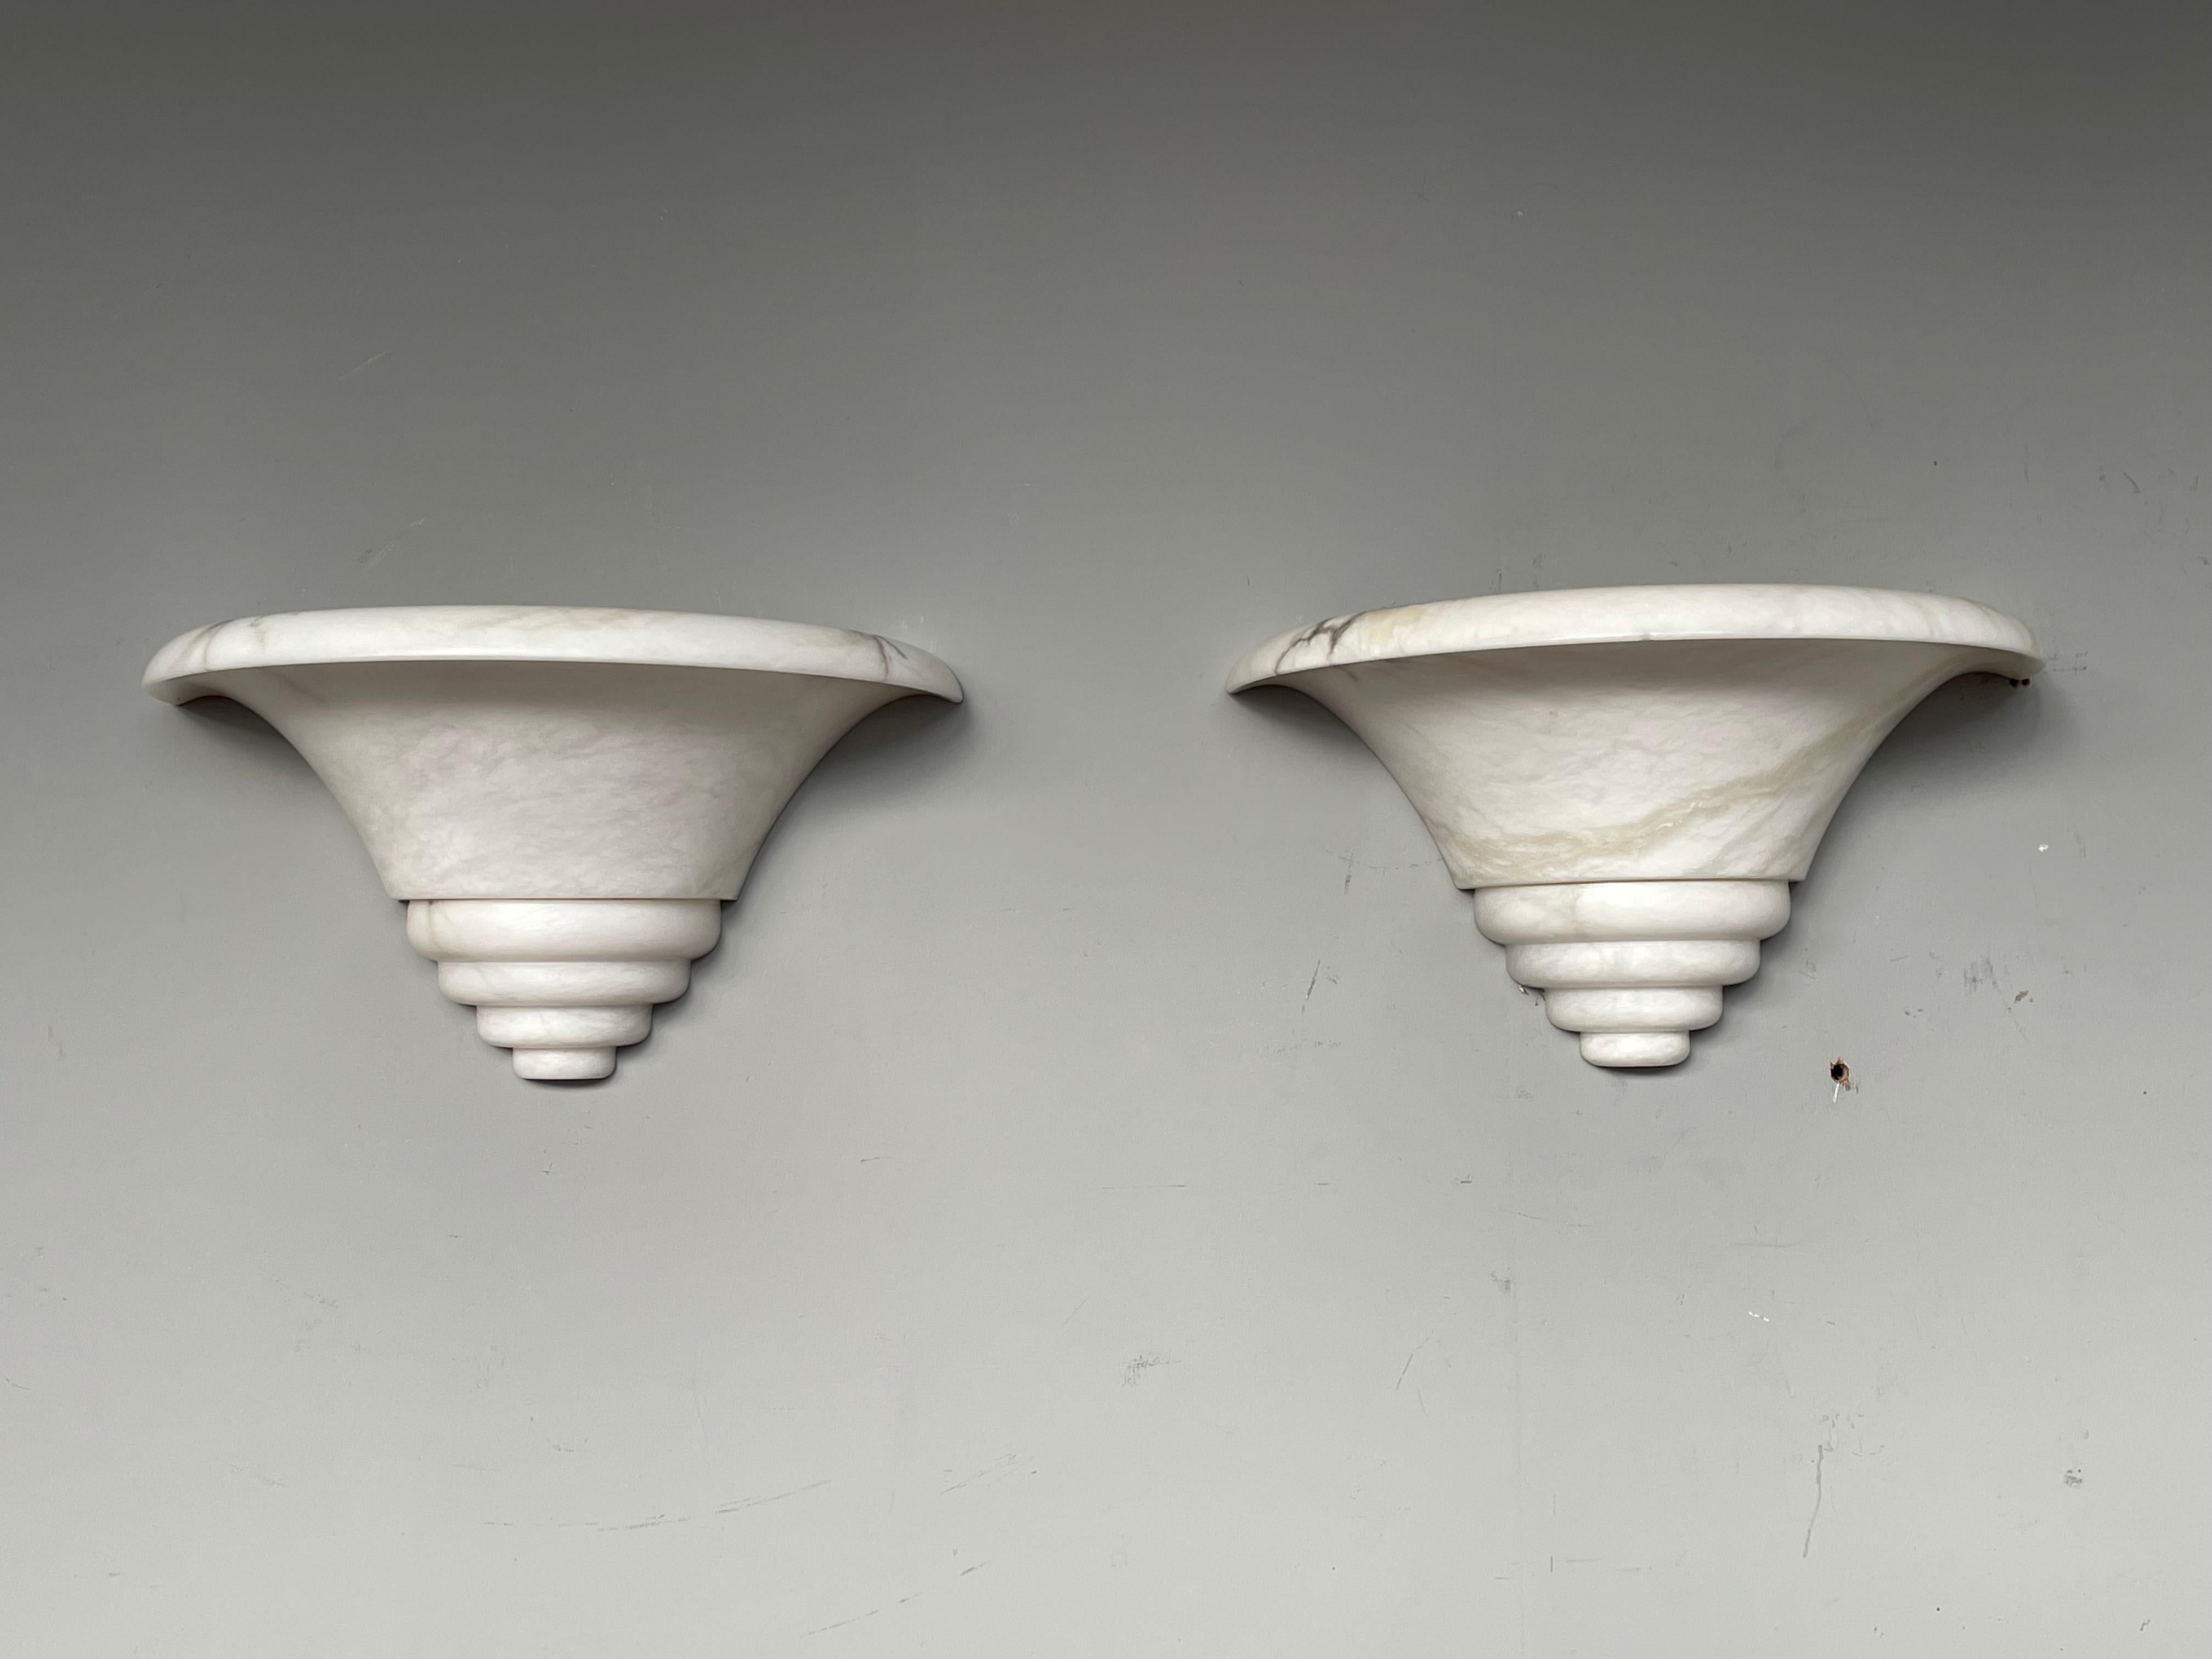 Exceptional Shape Midcentury Era Pair of Alabaster Wall Sconces Lamps / Lights For Sale 10